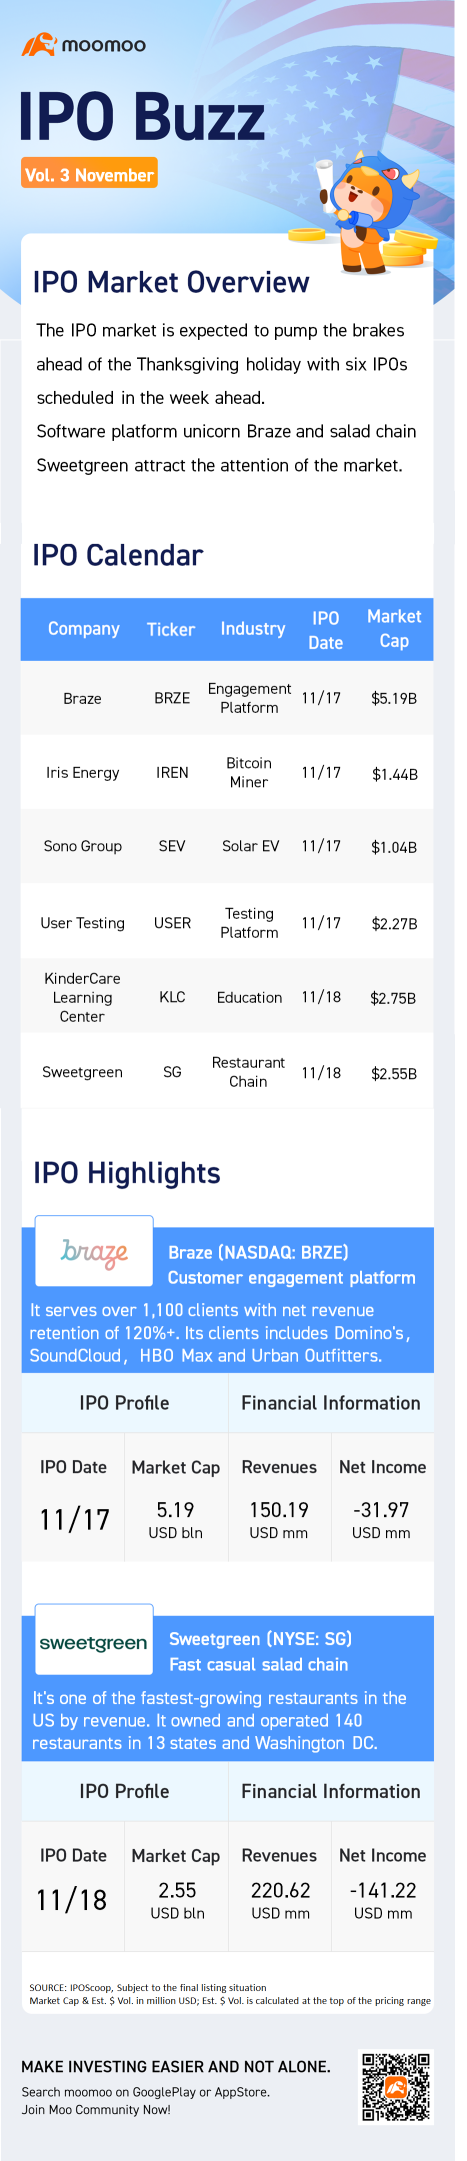 IPO Buzz | Braze tops this week's six IPOs as the holiday week approaches